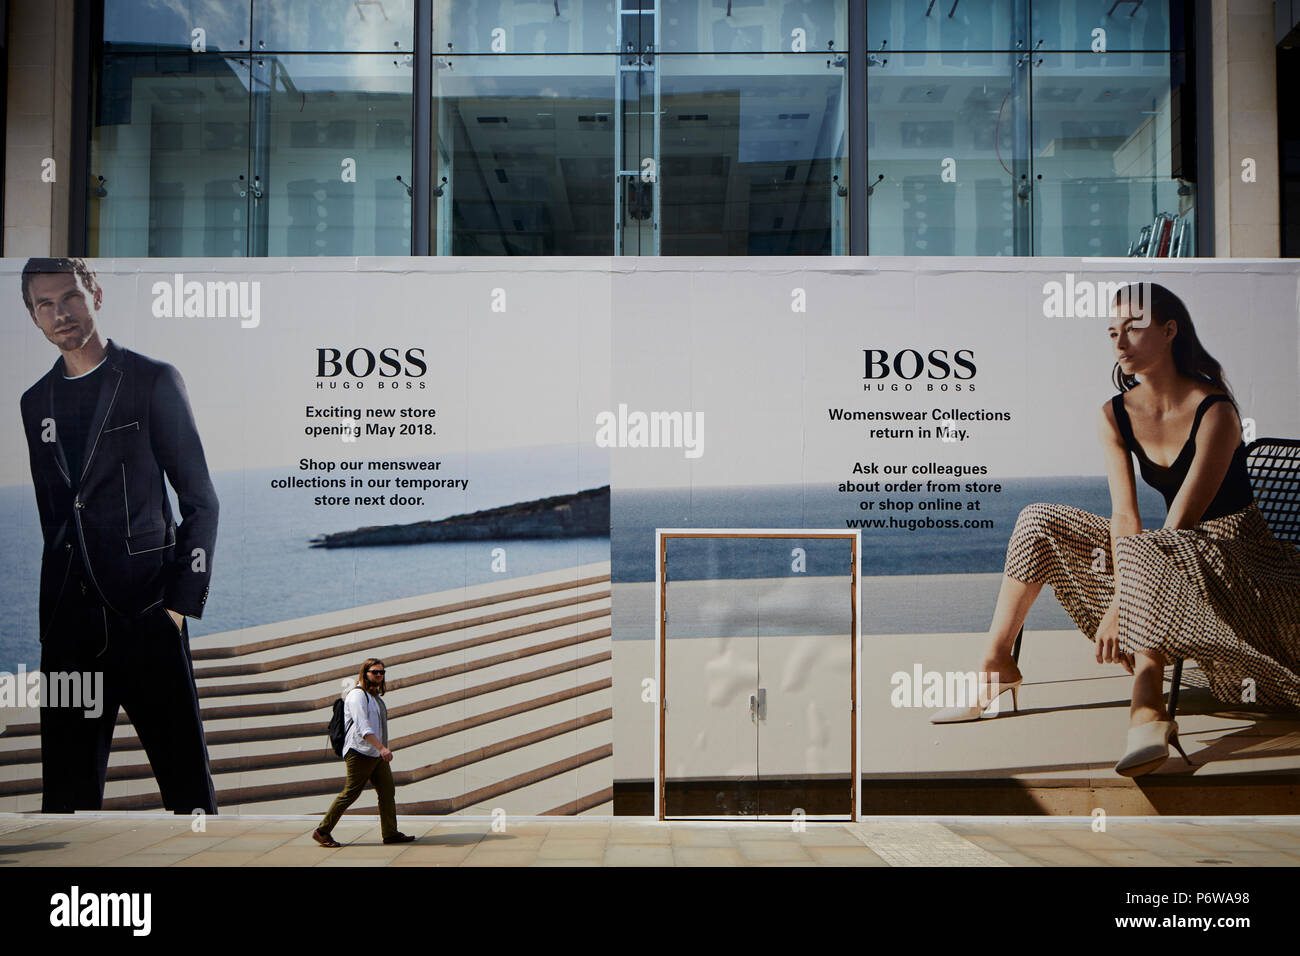 Hugo Boss Store High Resolution Stock Photography and Images - Alamy